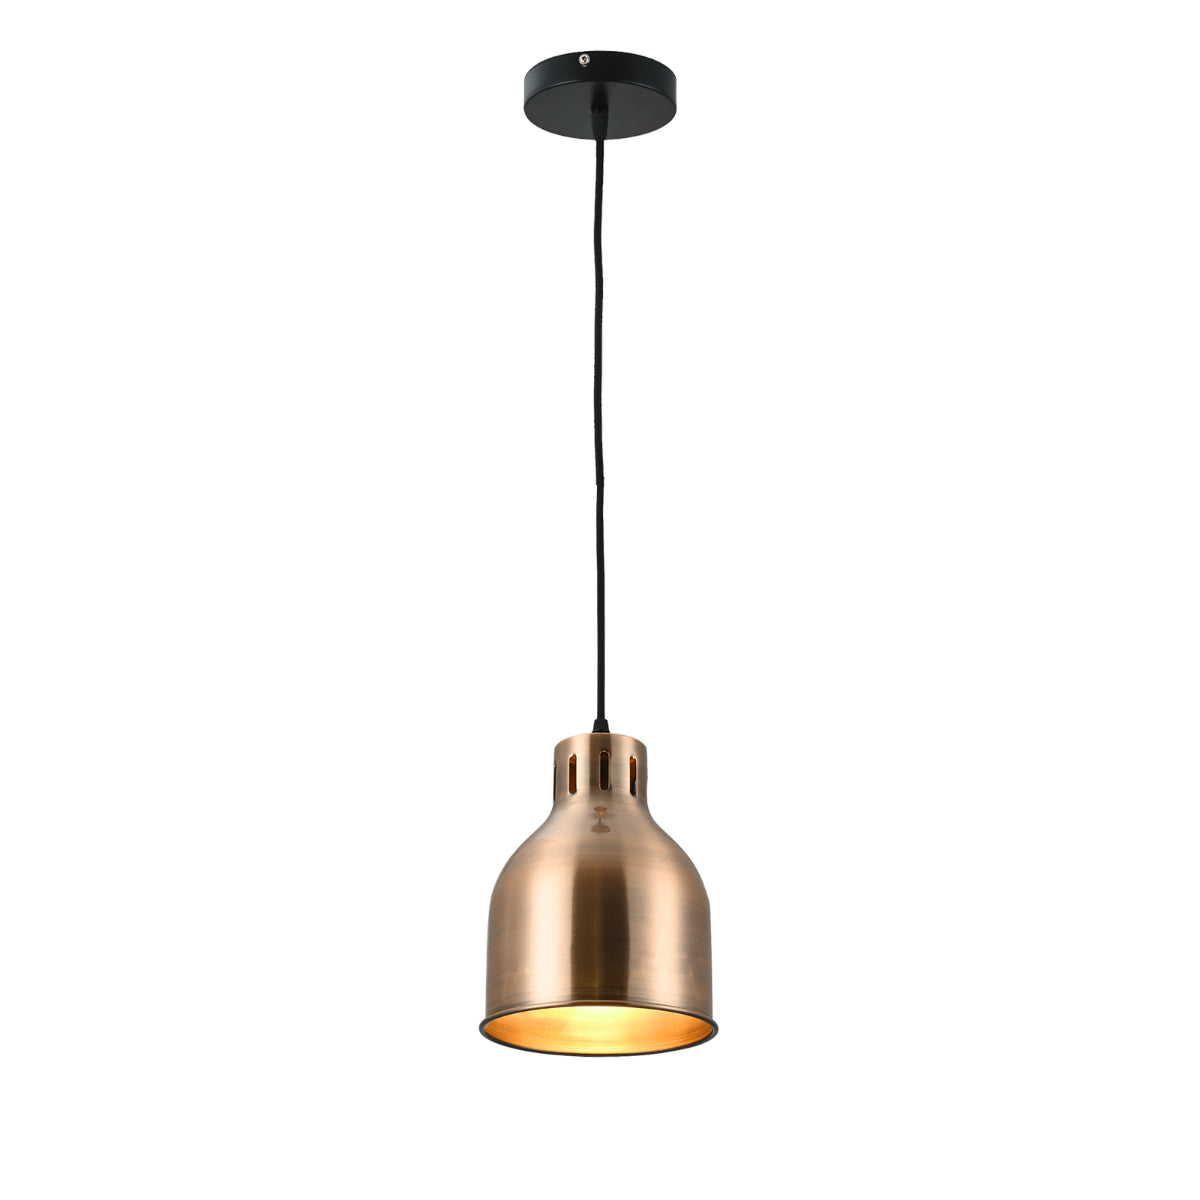 Main image of Contemporary Dome-Topped Cylinder Pendant Light 150-18439